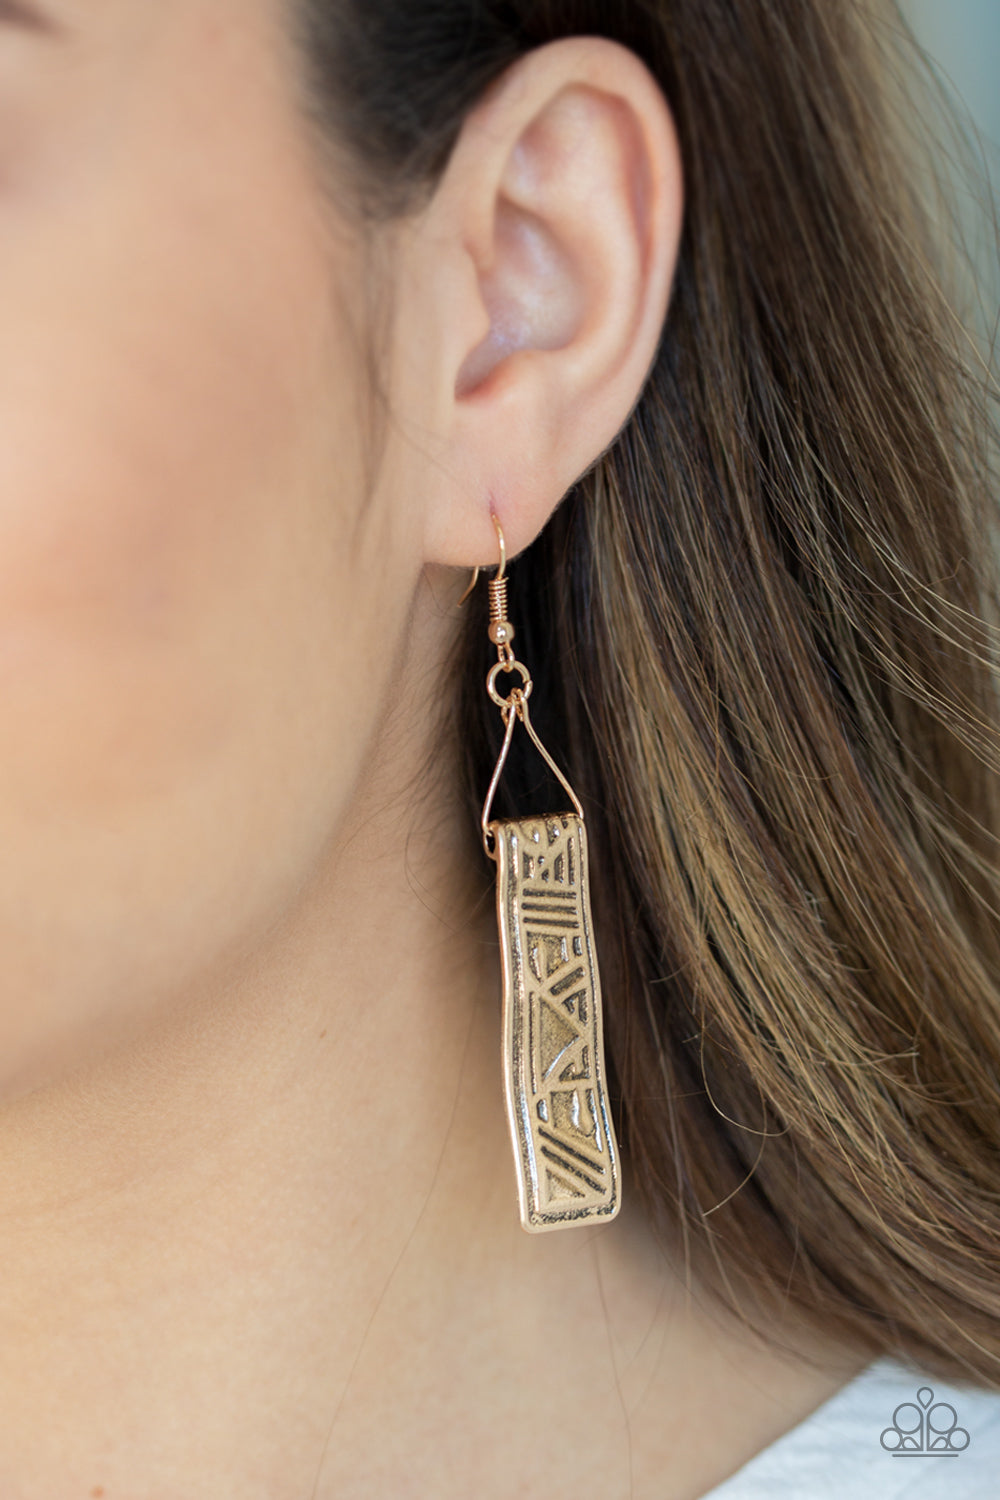 Ancient Artifacts - Gold Earrings